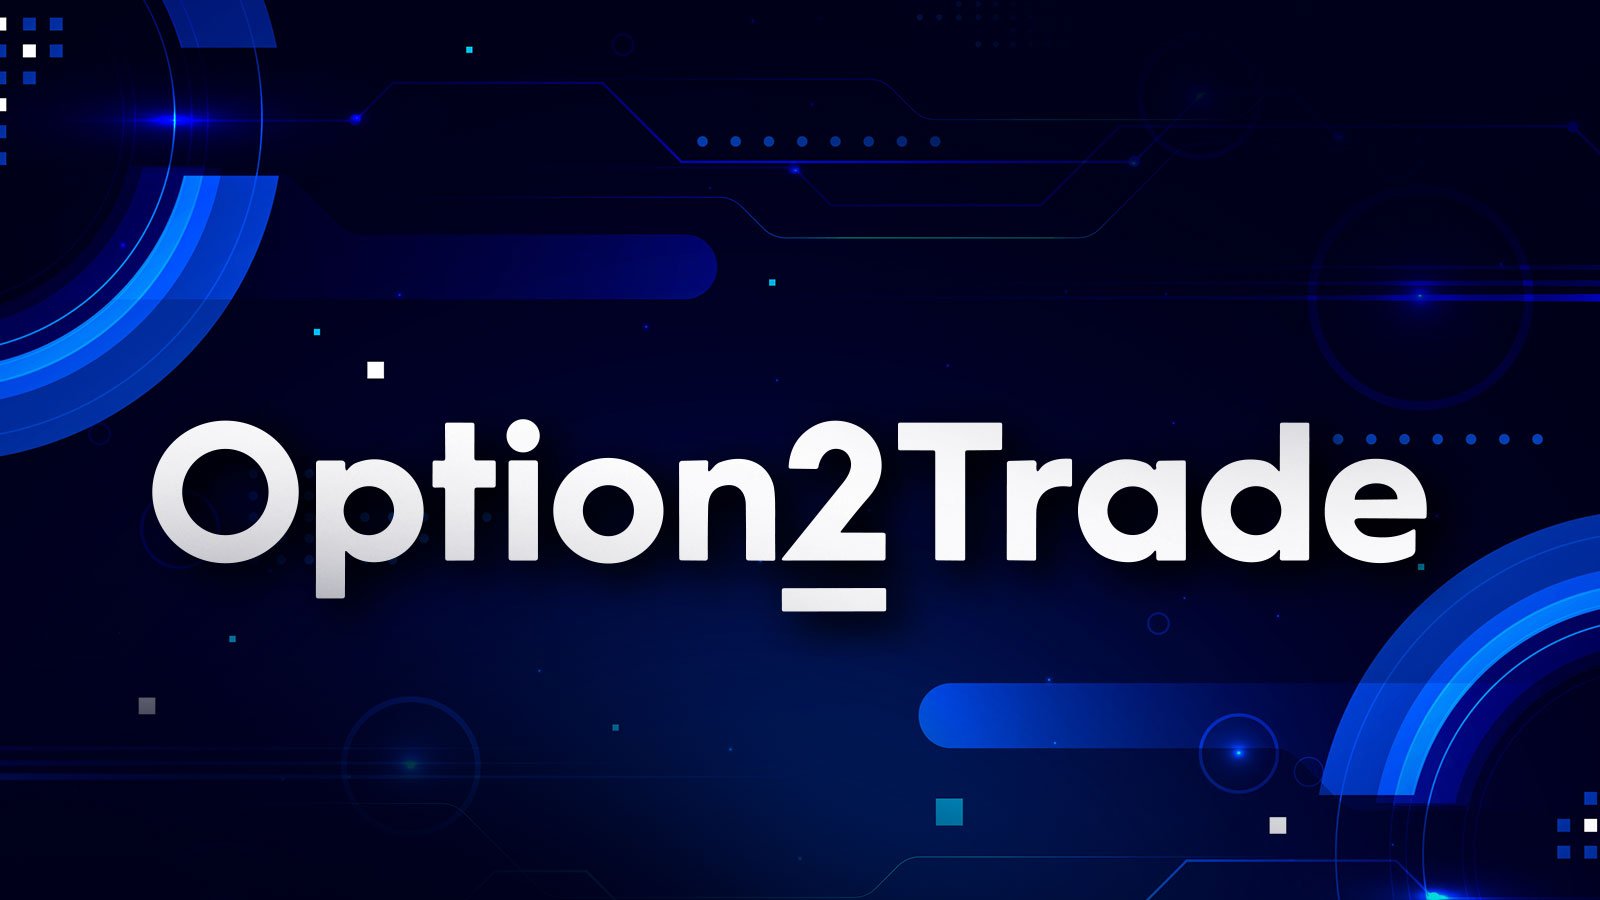 Option2Trade (O2T) Altcoin Might be Destined for Growth in 2024 as Polygon (MATIC) and Stacks (STX) Supporters Optimistic